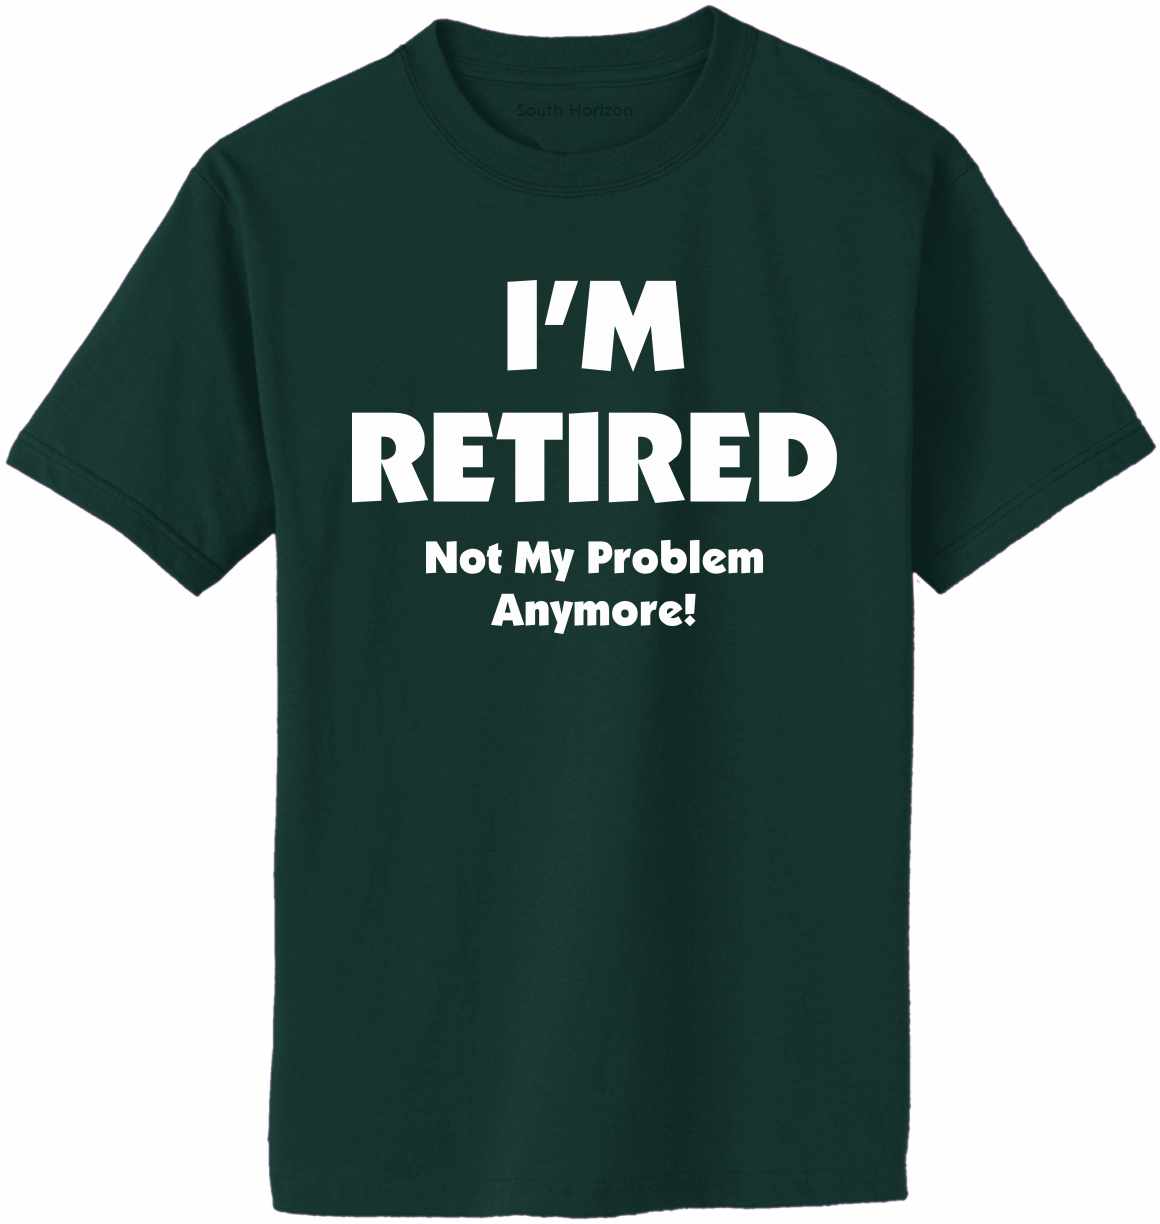 I'M RETIRED NOT MY PROBLEM ANYMORE Adult T-Shirt (#1072-1)